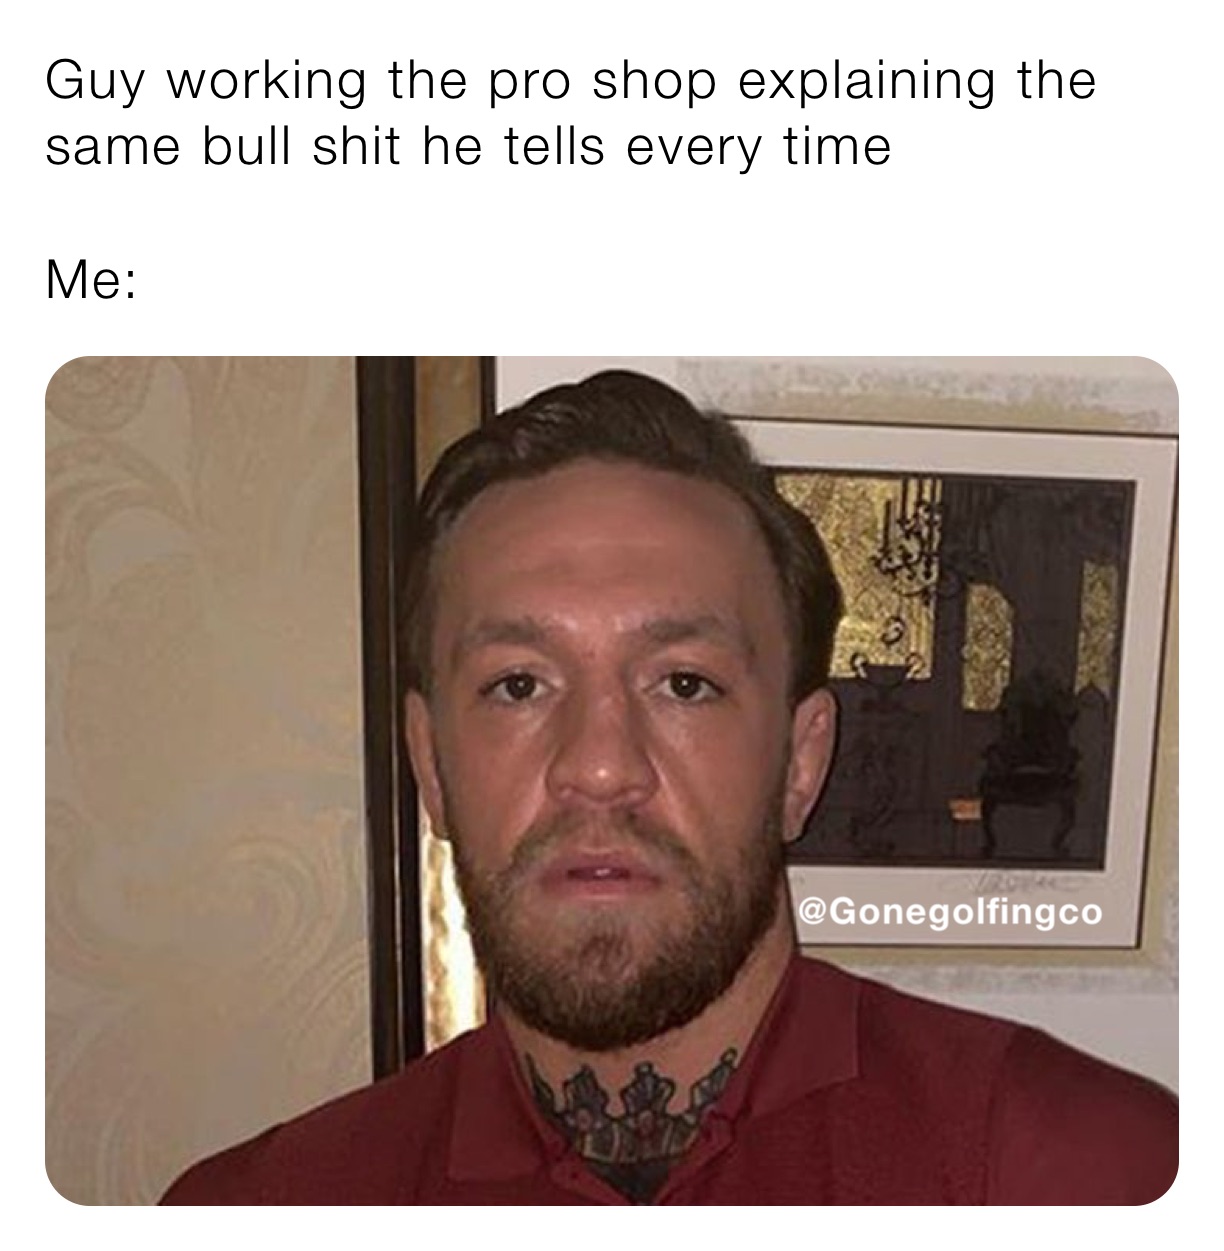 Guy working the pro shop explaining the same bull shit he tells every time

Me: 